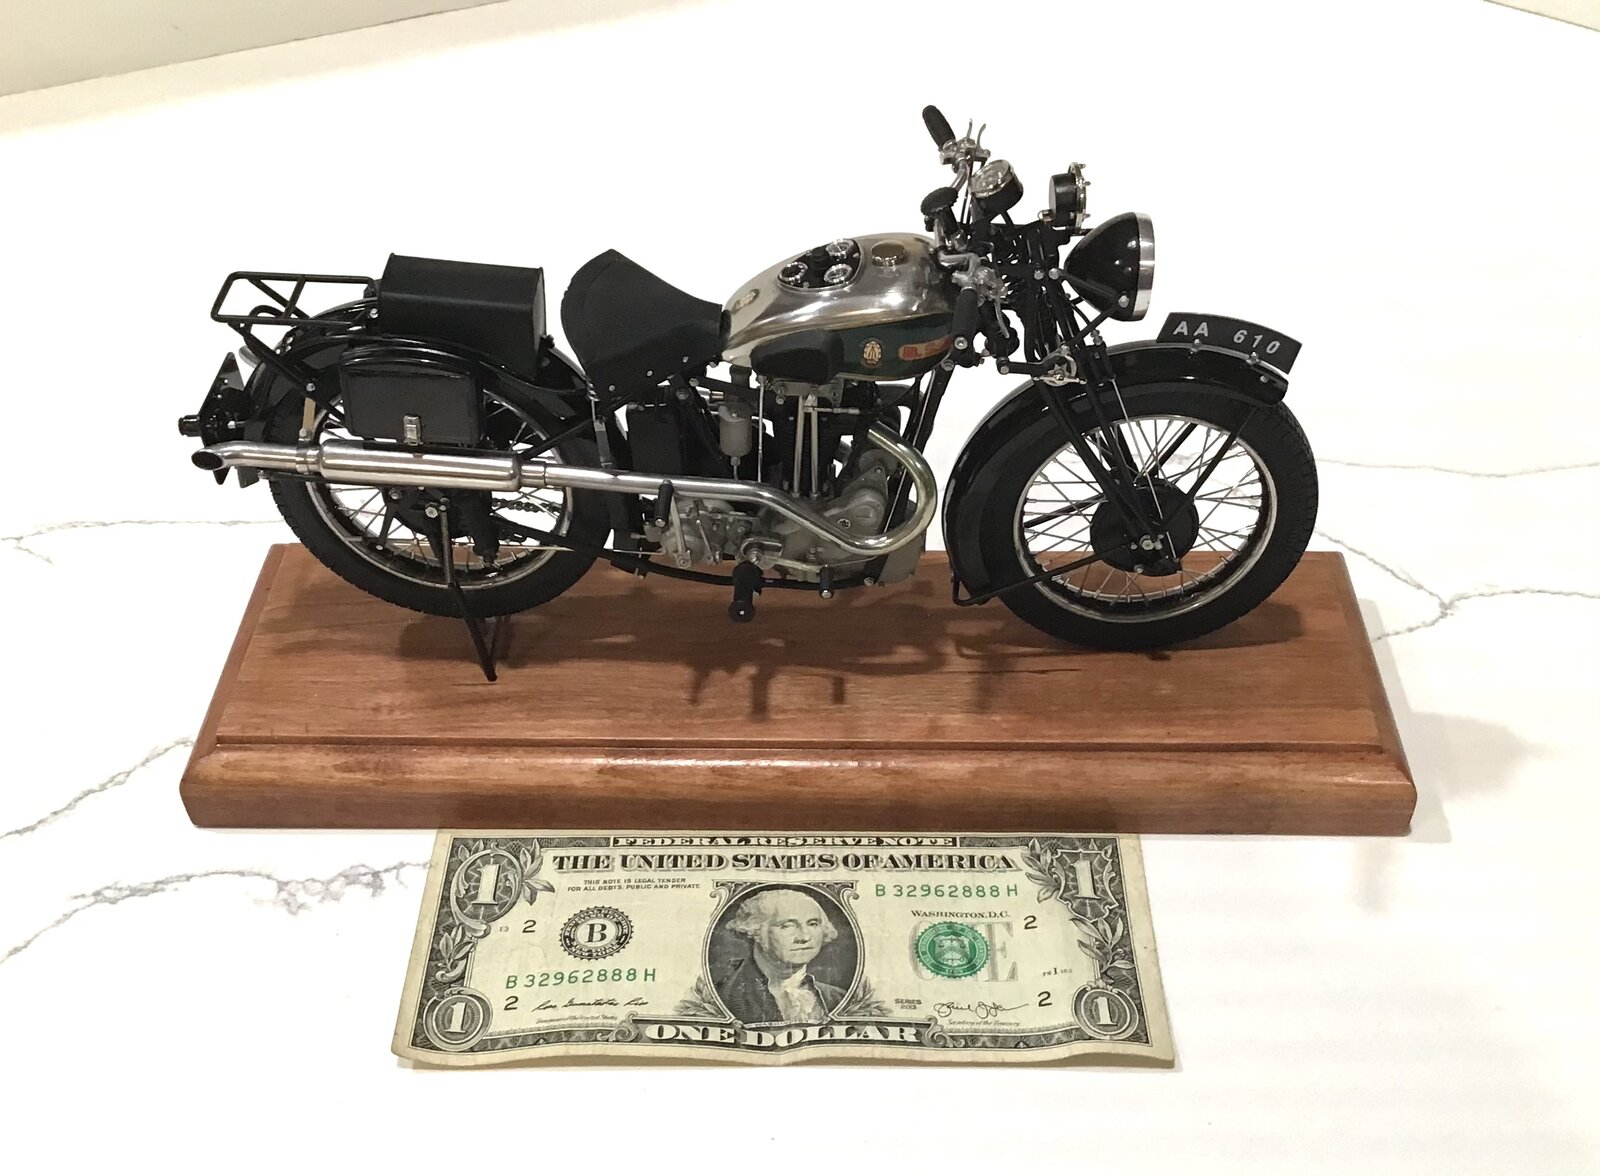 Scale model motorcycle